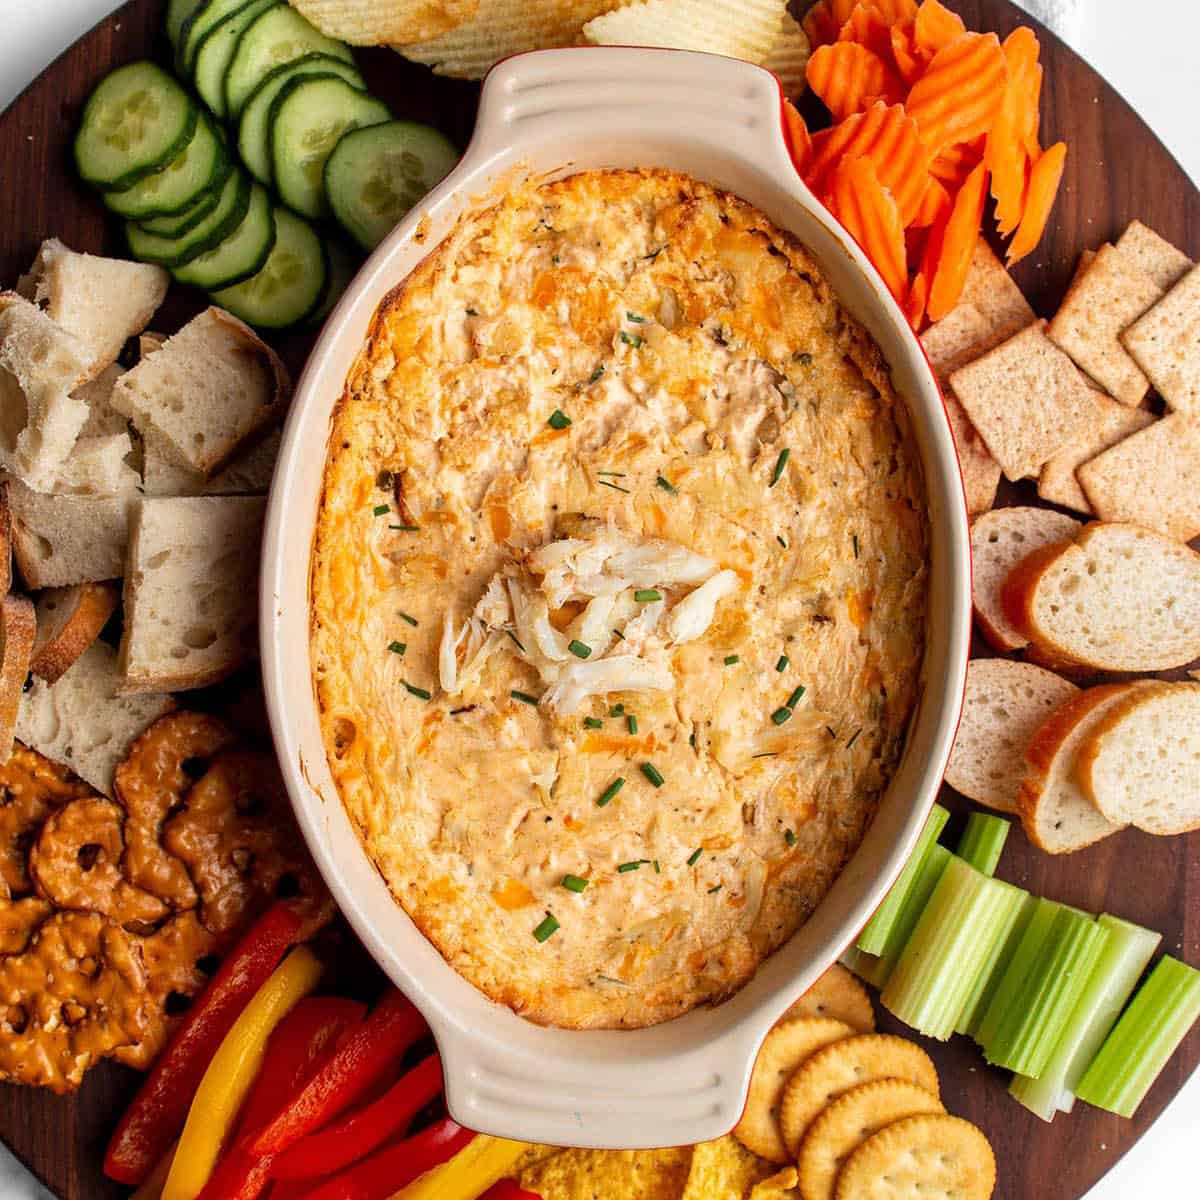 A large circular wood board with a hot crab dip in the middle with fresh produce, bread, chip and crackers around the dish.